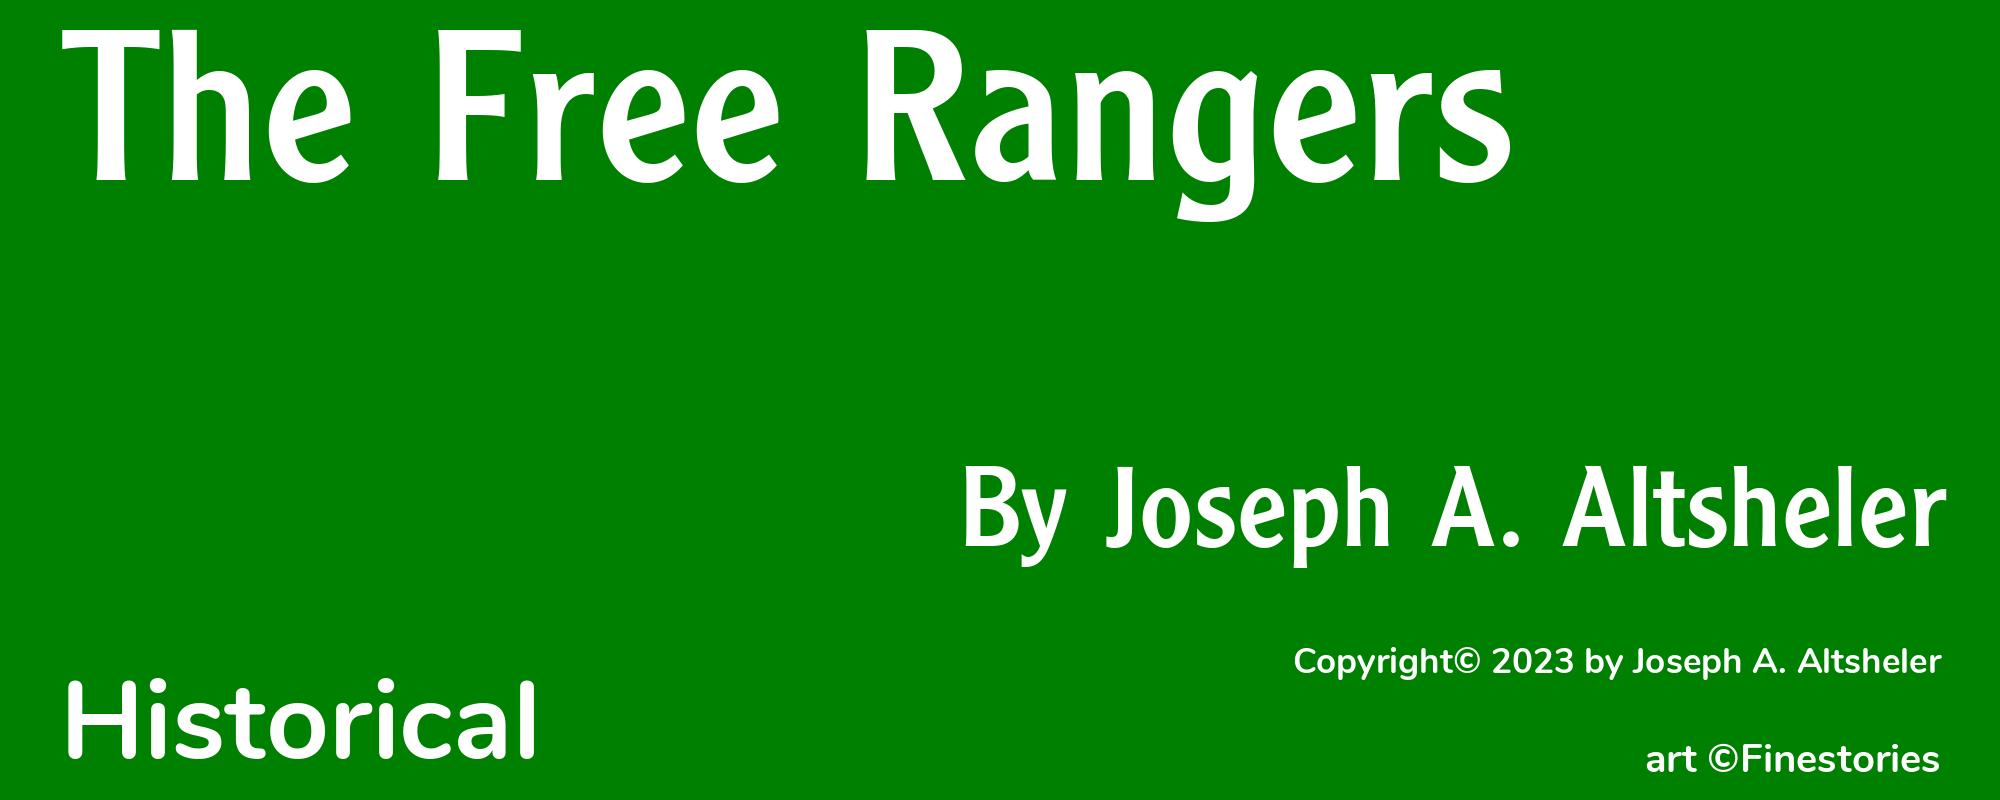 The Free Rangers - Cover